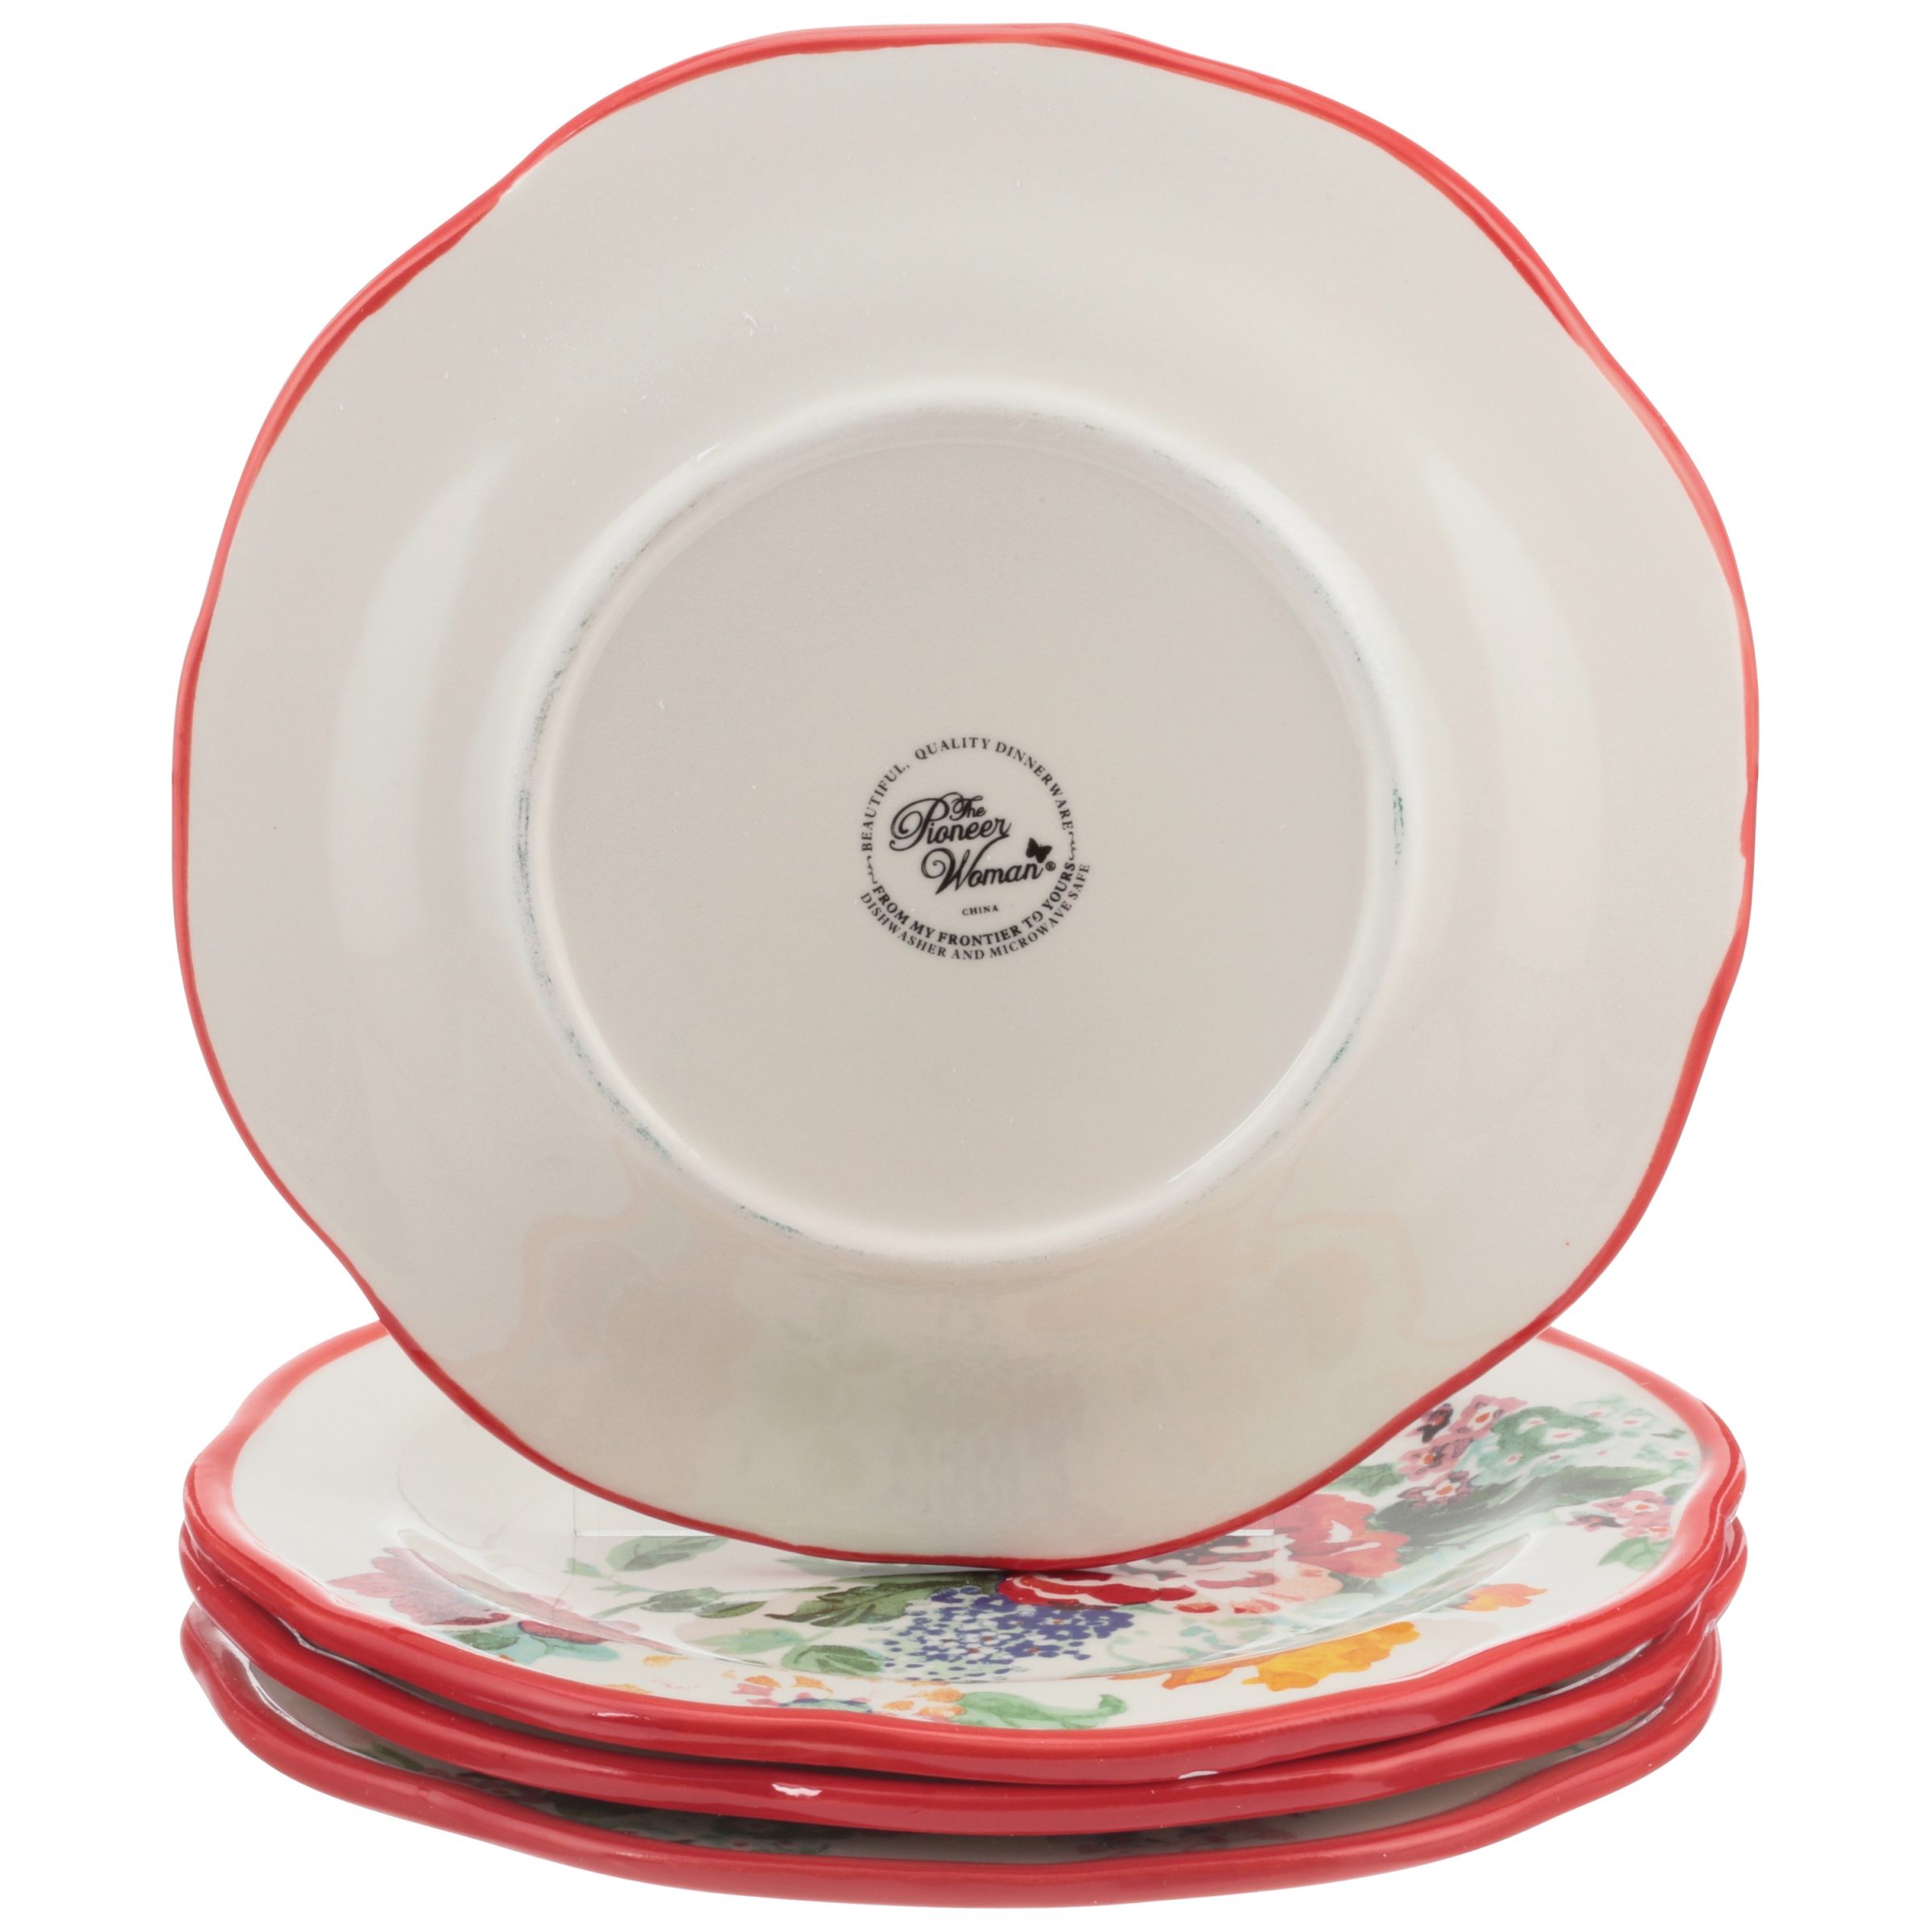 The Pioneer Woman Country Garden 4-Piece Salad Plate Set - image 4 of 4